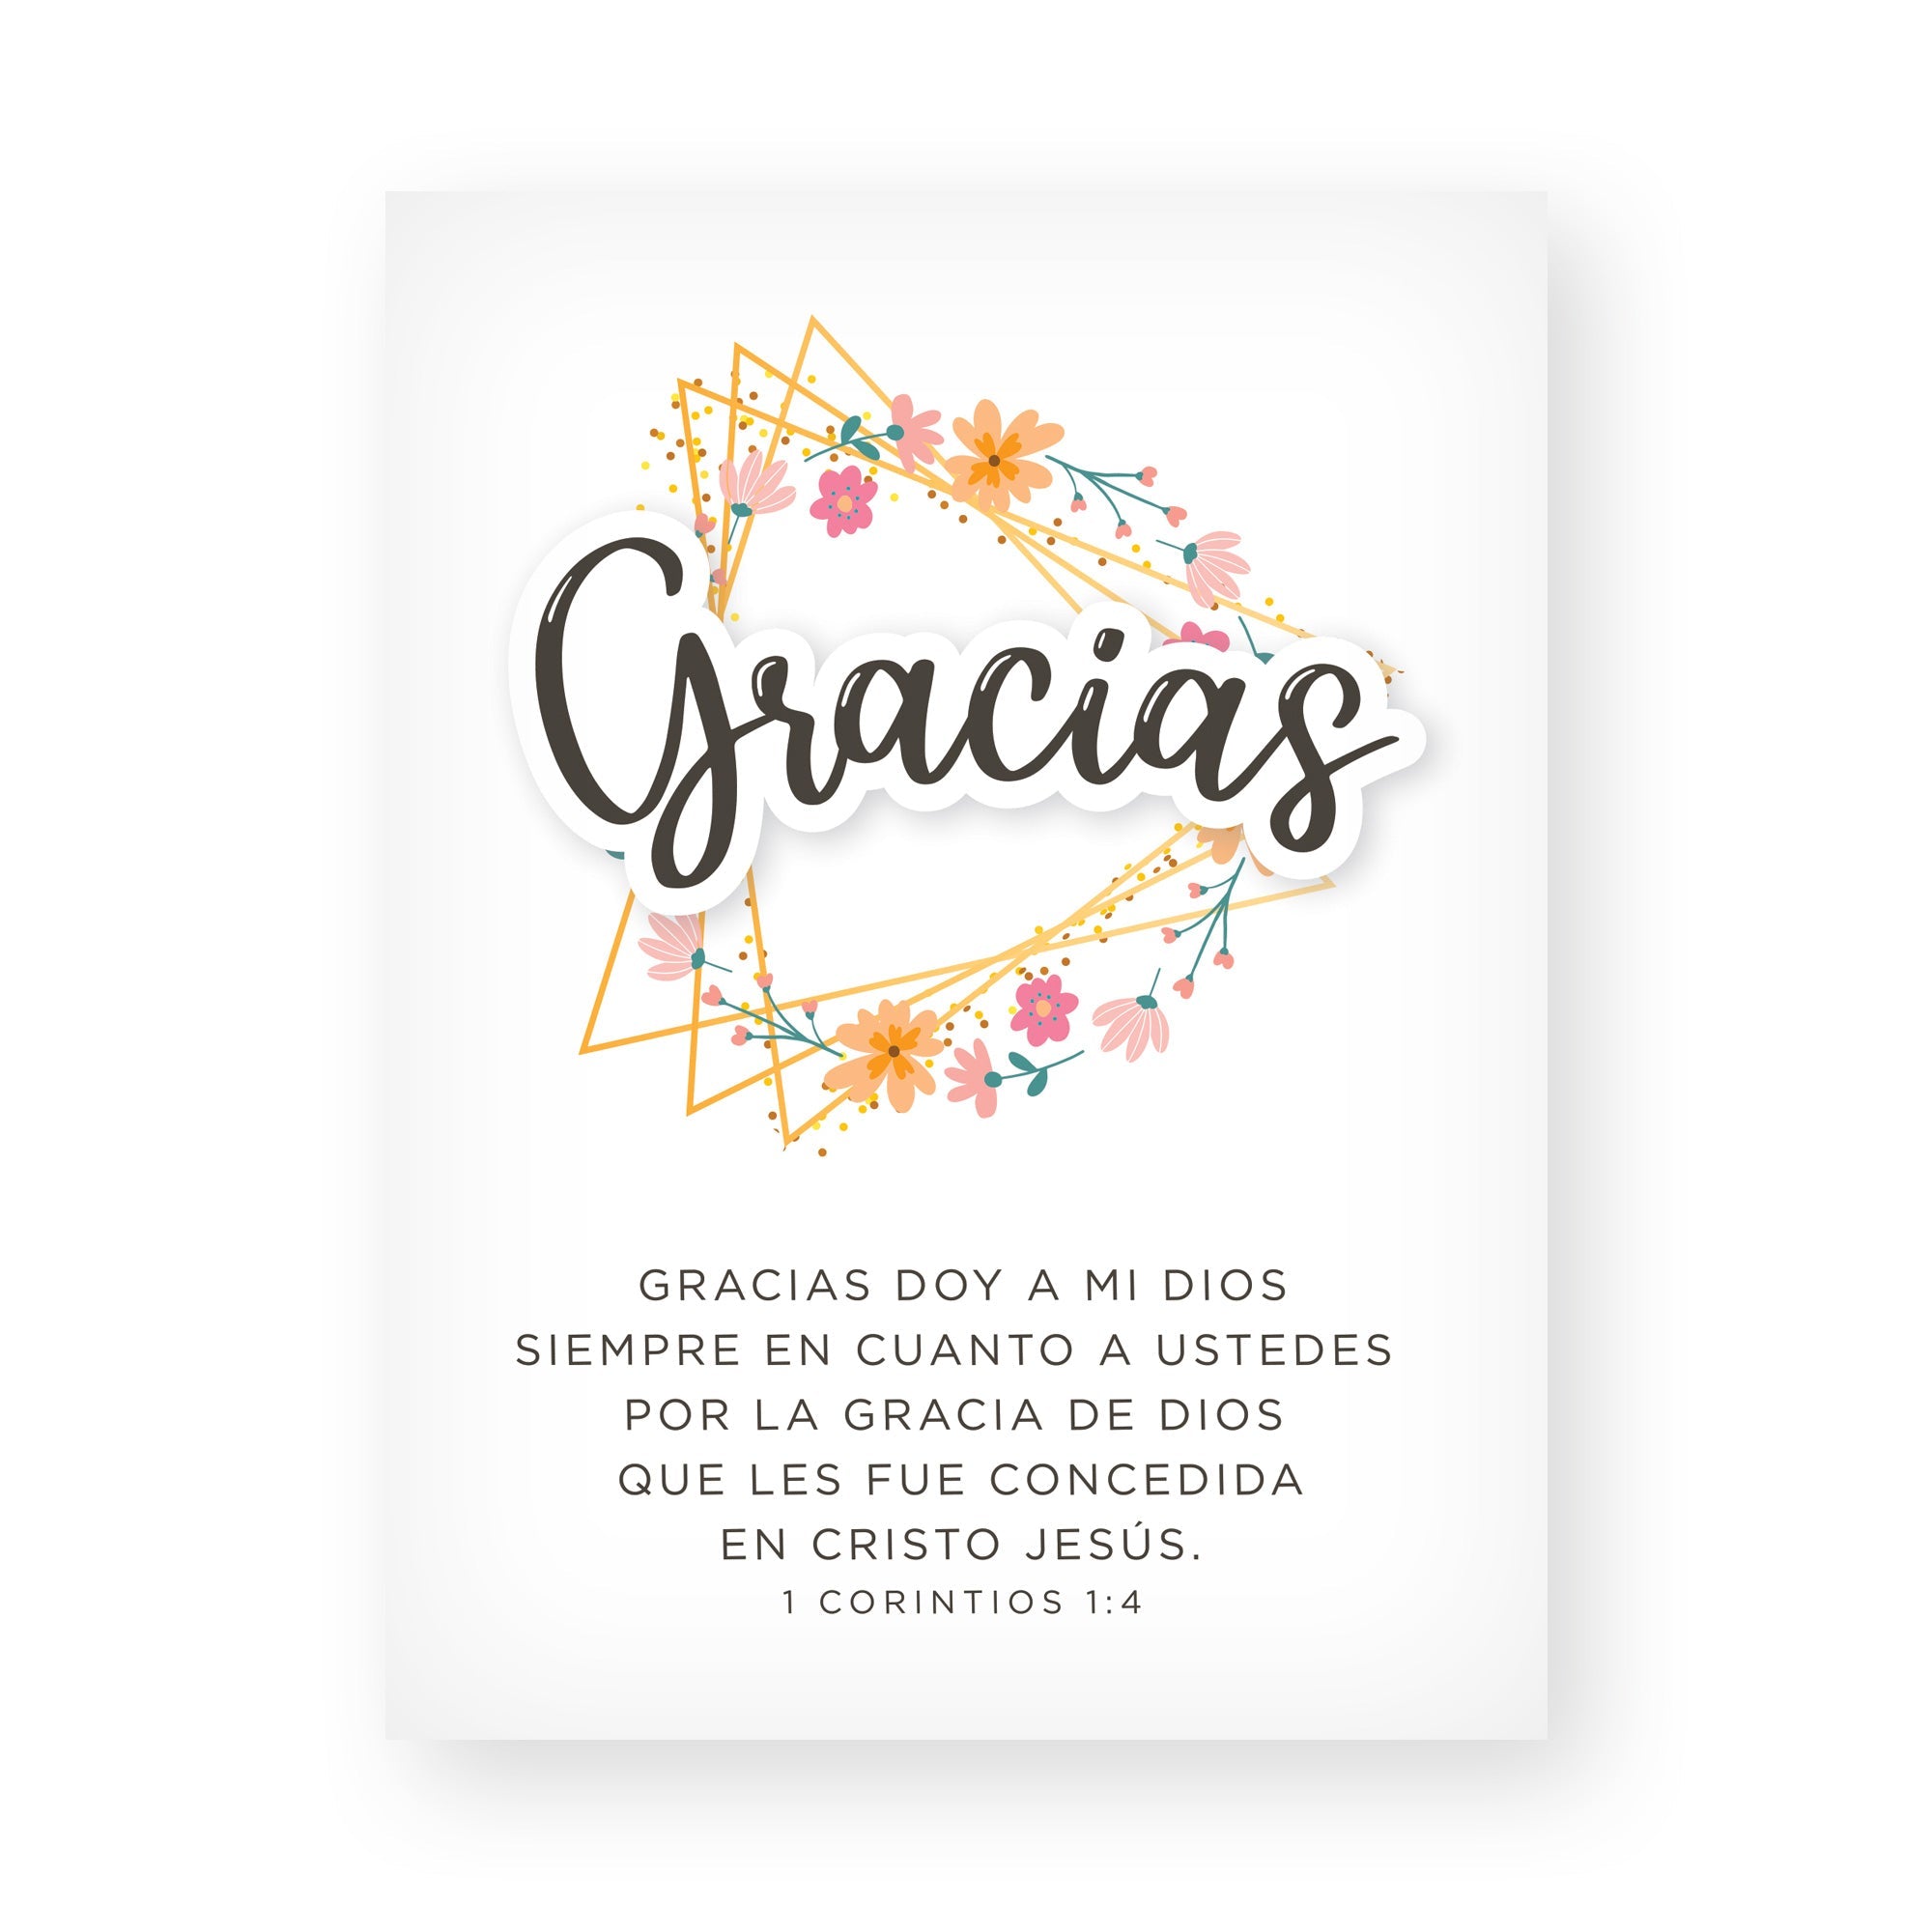 Thank You Cards with 1 Corinthians 1:4 – Spanish